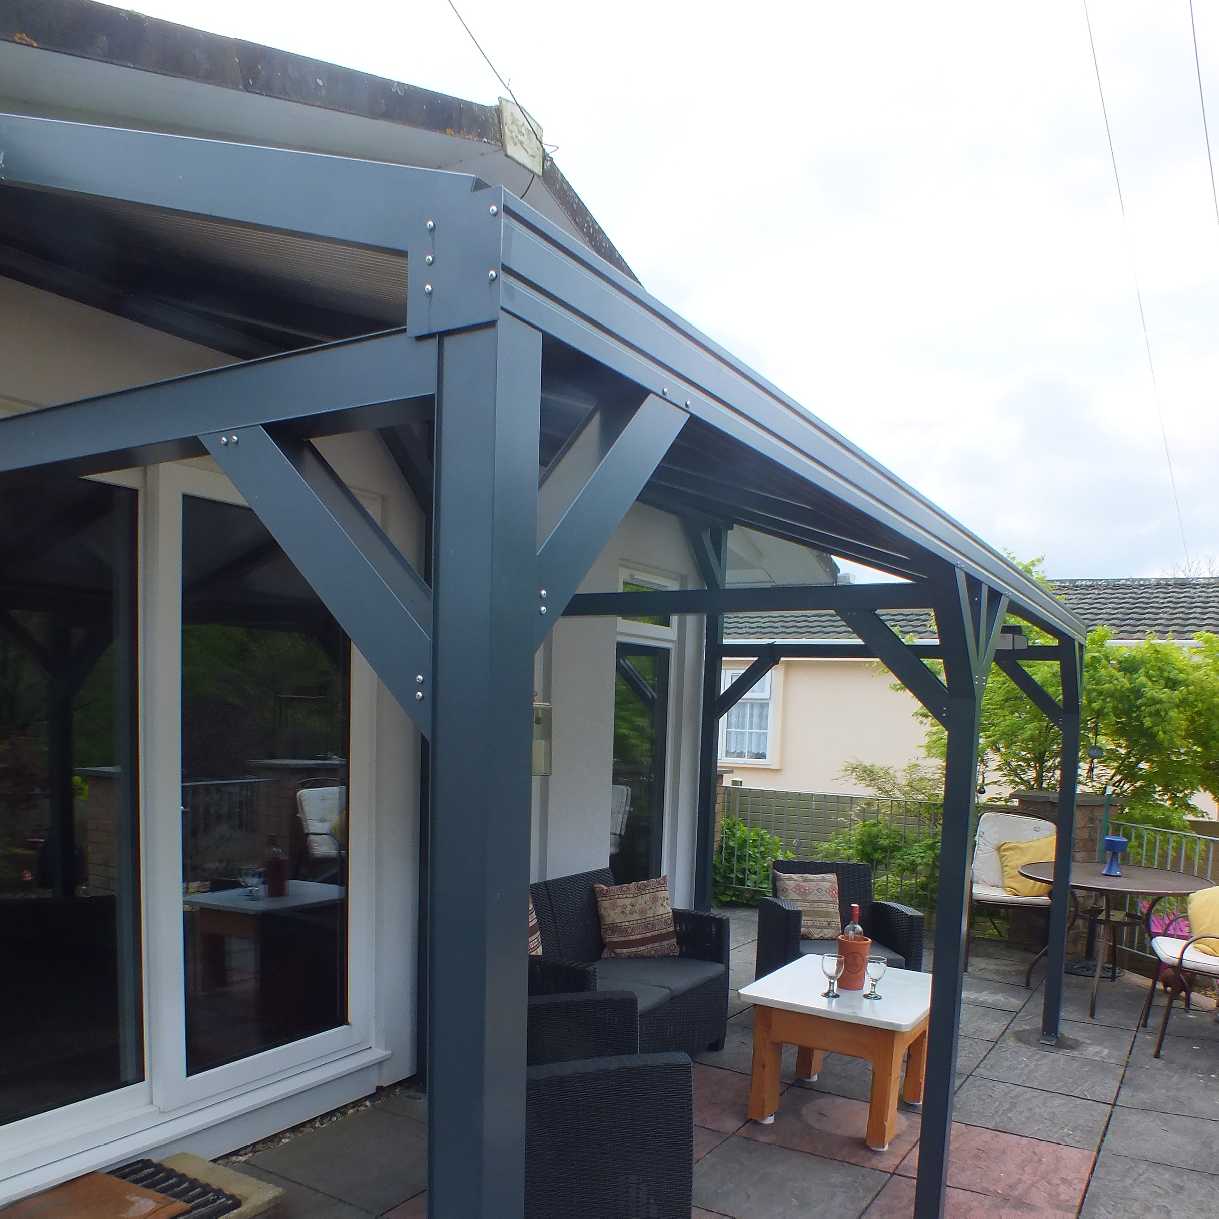 Affordable Omega Smart Free-Standing, Anthracite Grey MonoPitch Roof Canopy with 16mm Polycarbonate Glazing - 6.3m (W) x 3.5m (P), (8) Supporting Posts